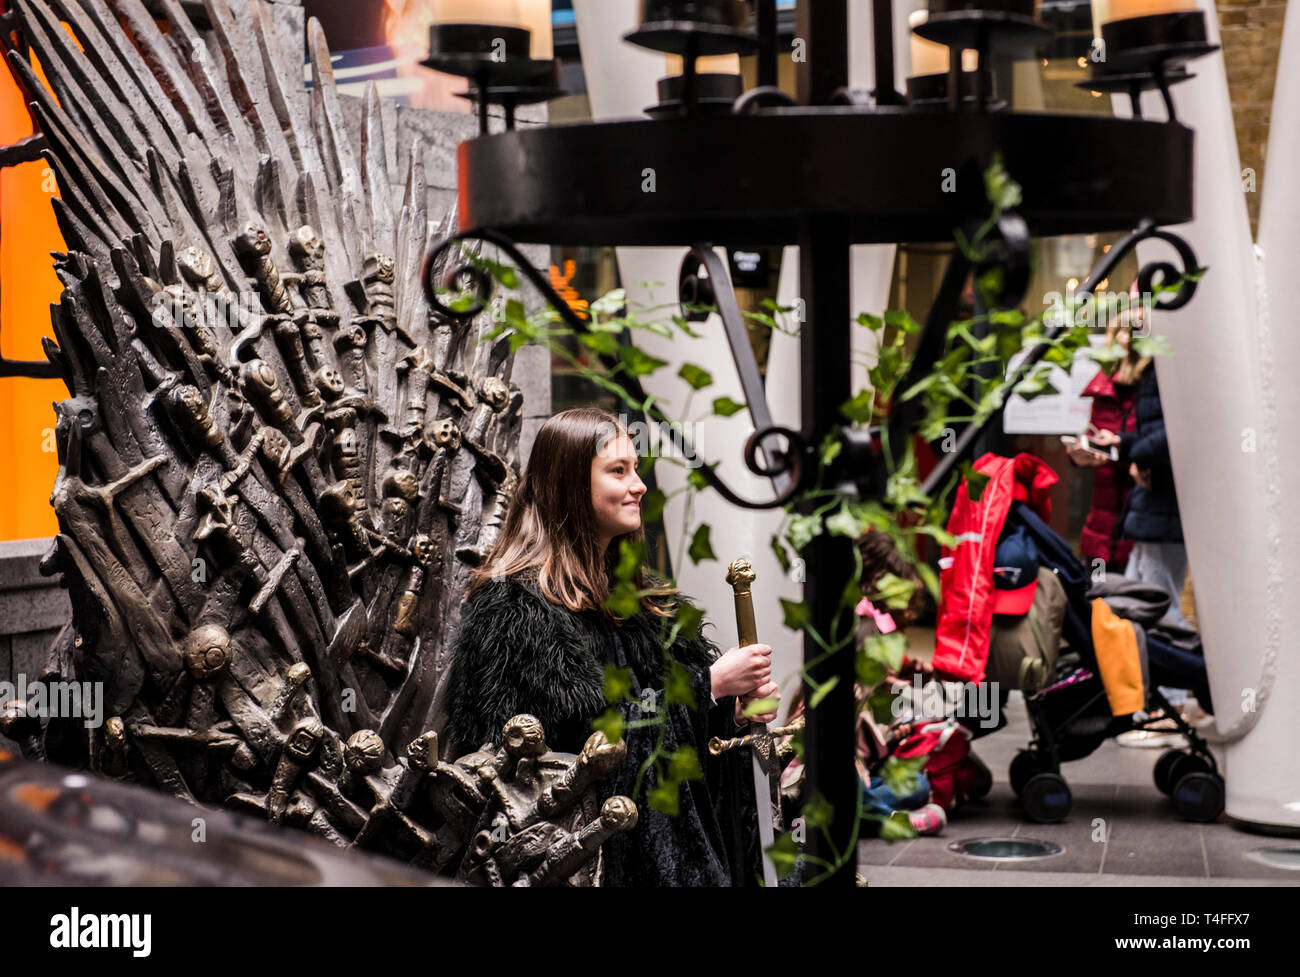 London, England, 16.04.2019.  A Game of Thrones fan poses for a photo sitting on the famous iron throne in Kings Cross station in Central London, following the premiere of the final season of GoT. Credit: Ernesto Rogata/Alamy. Stock Photo